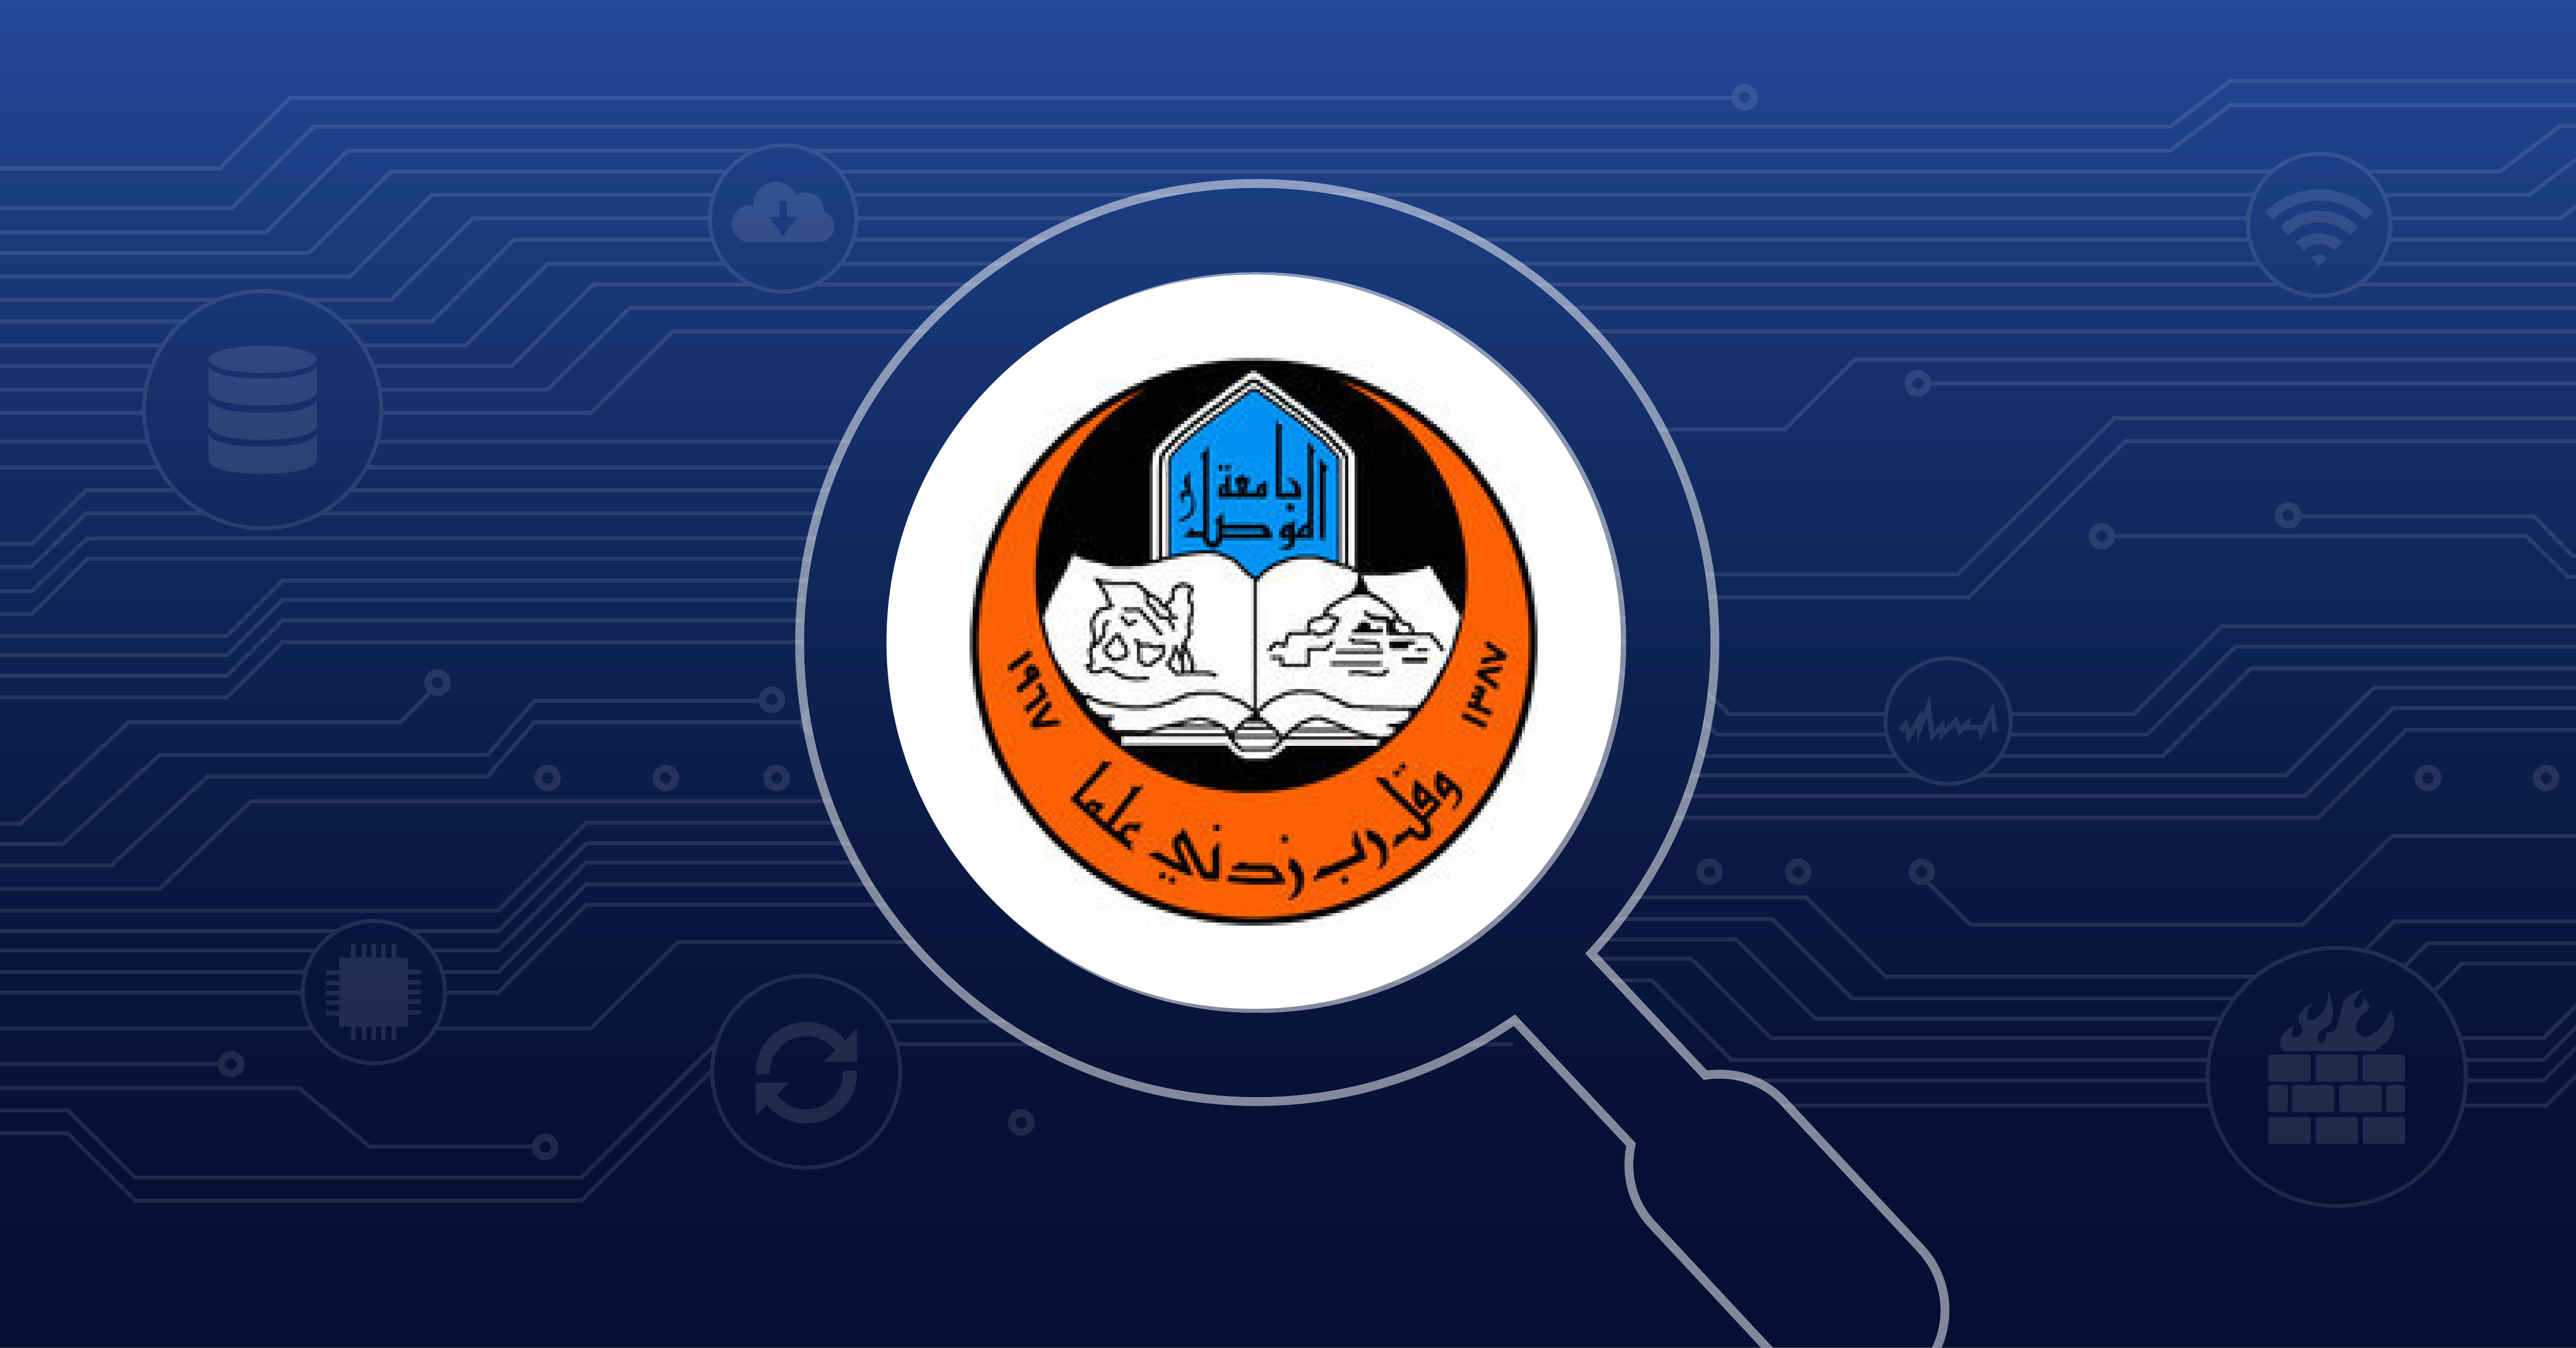 PRTG helped the University of Mosul deliver online learning during the pandemic